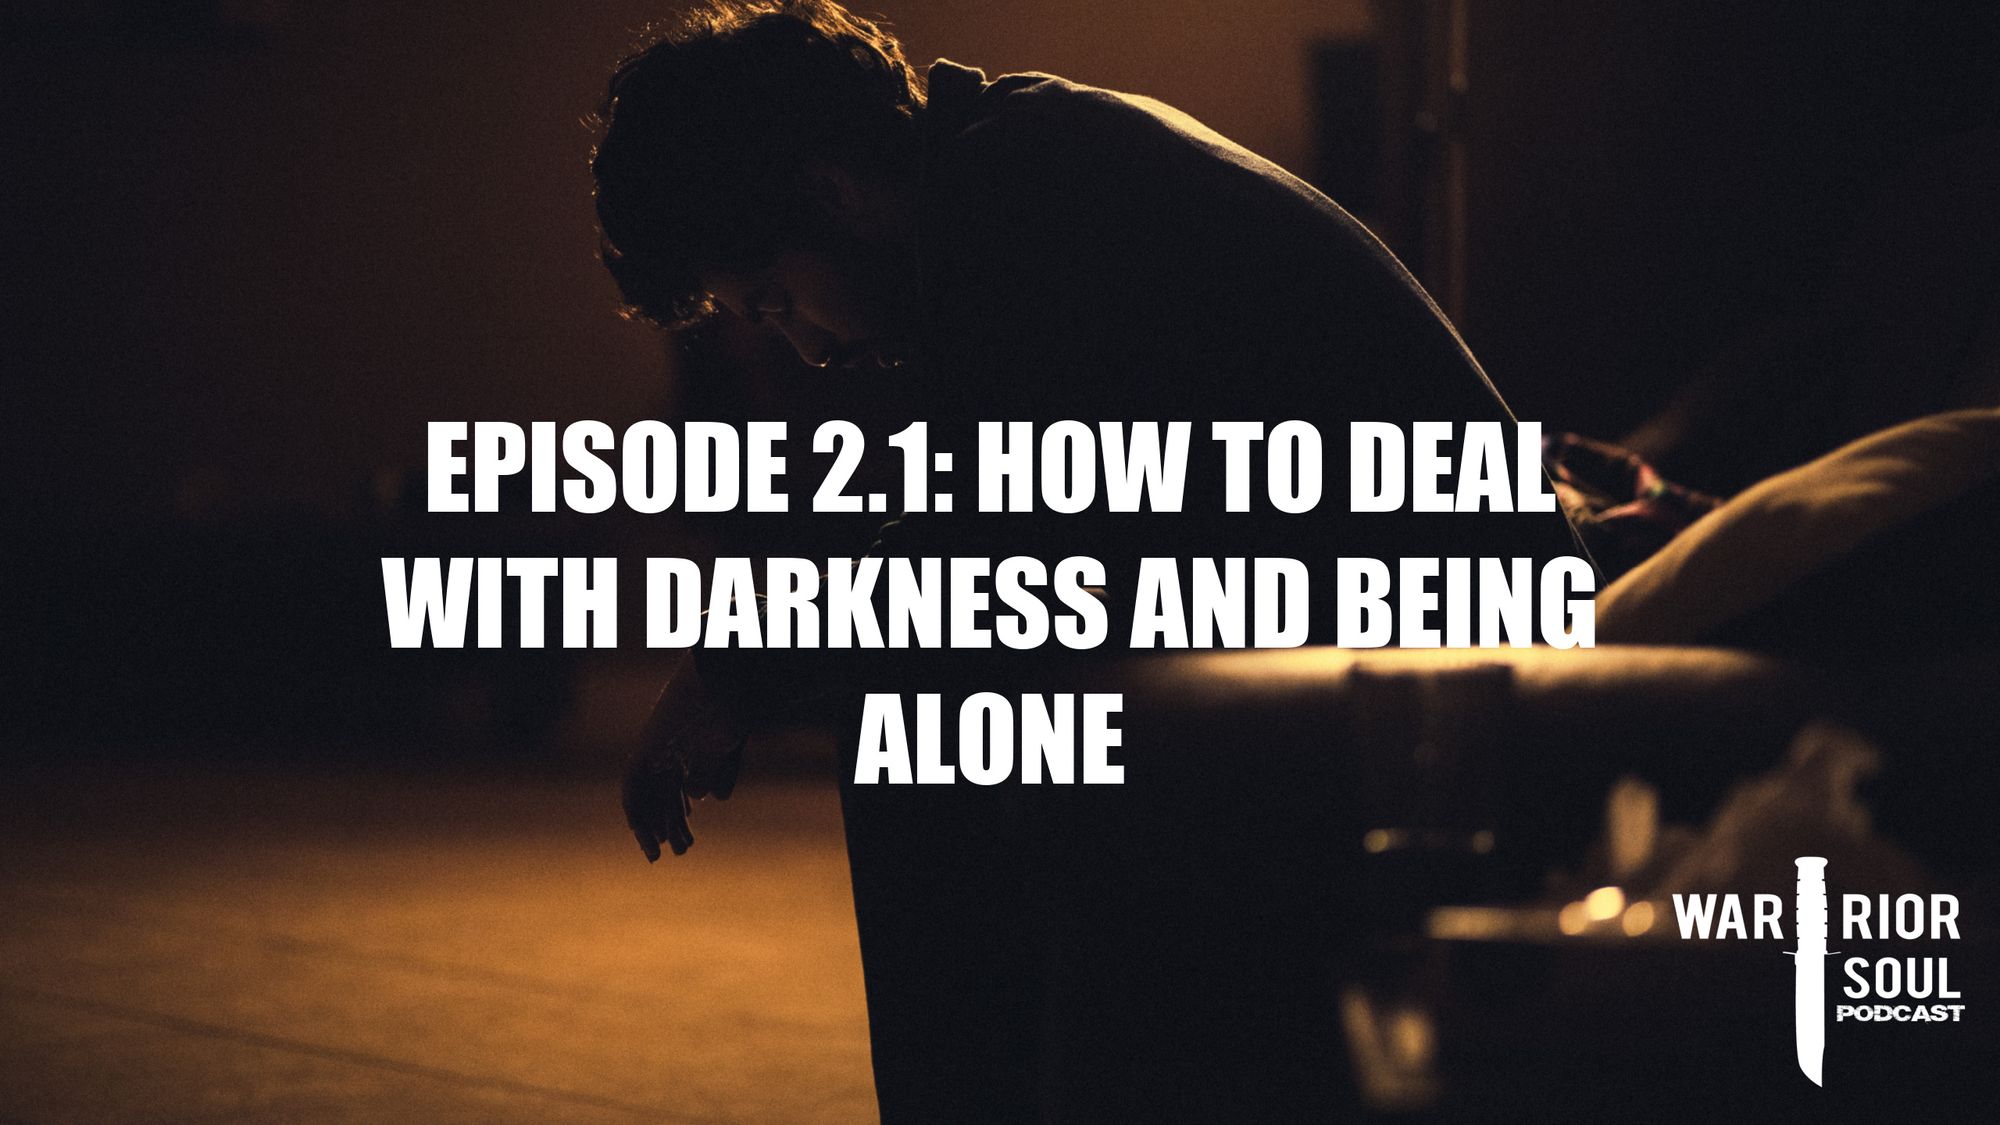 Episode 2.1: How to Deal with Darkness and Being Alone